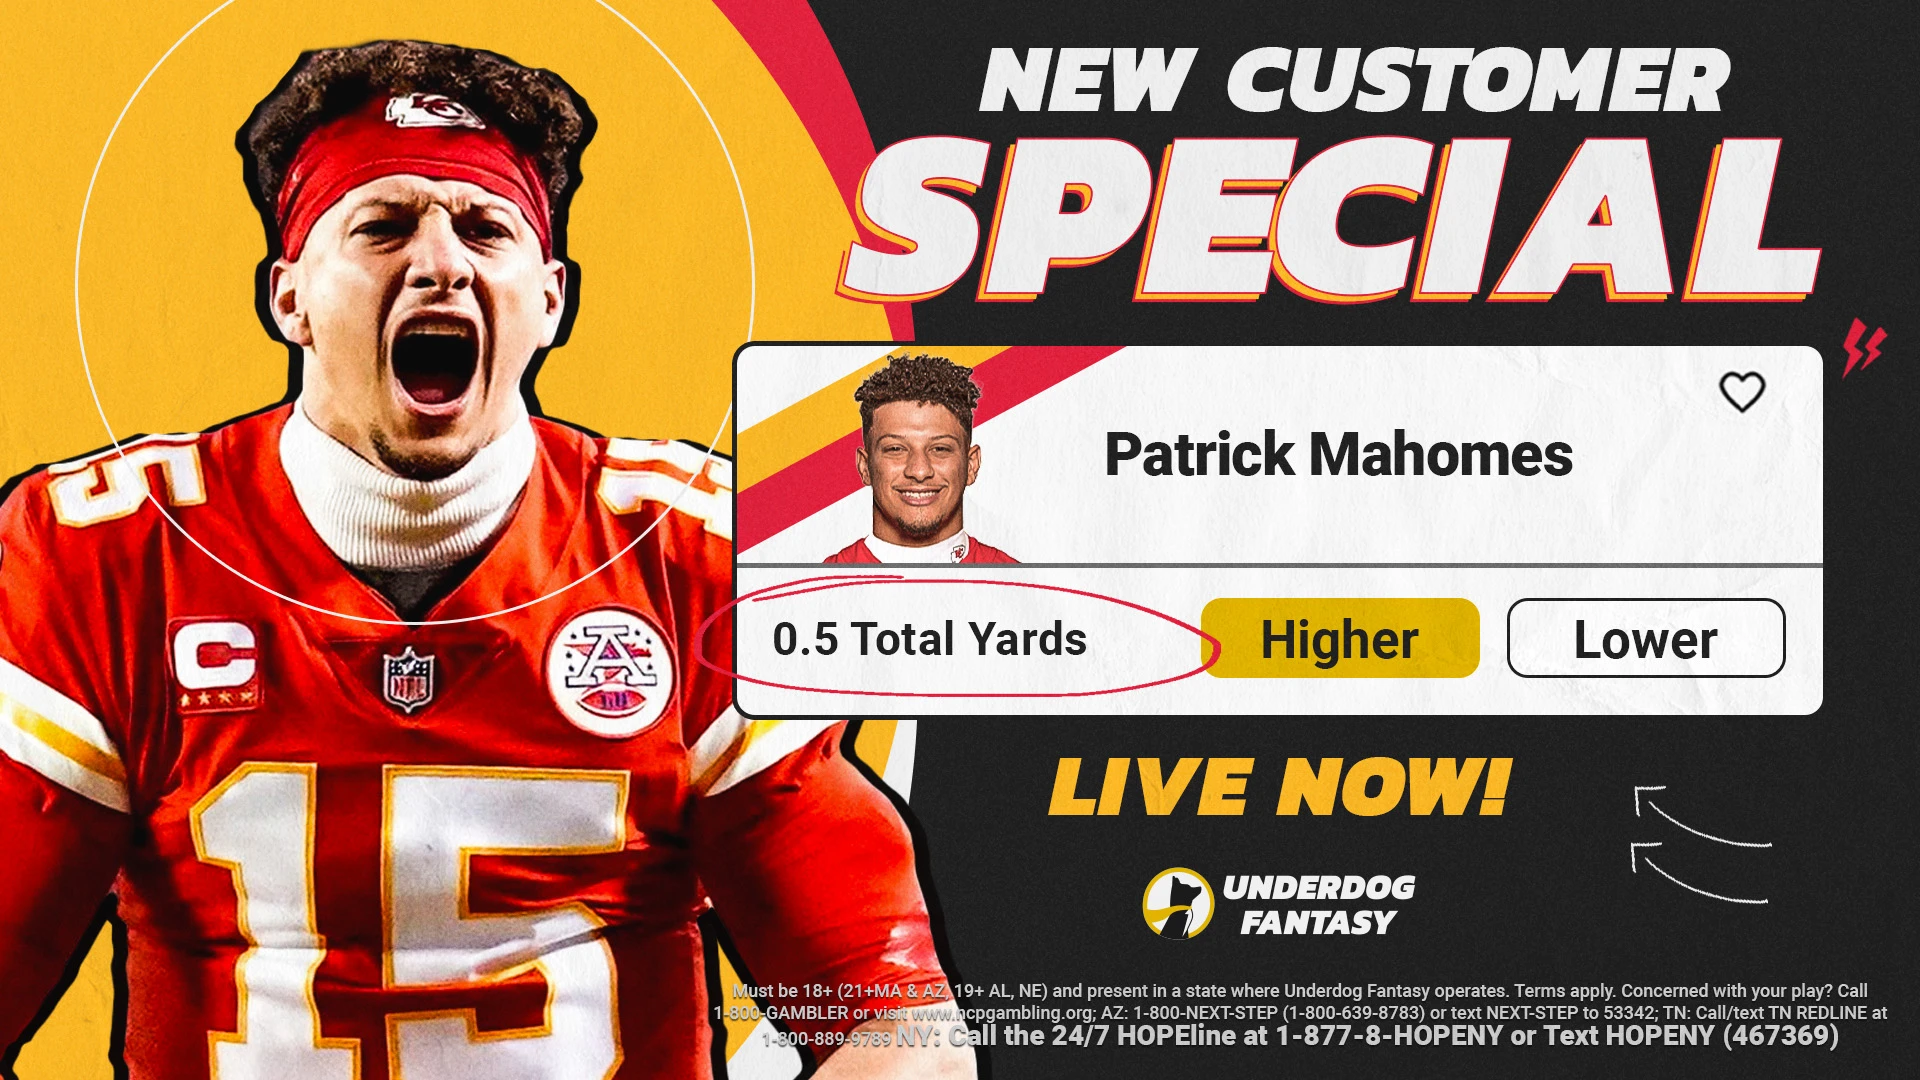 NFL player props special at Underdog Fantasy for Super Bowl 58 is Patrick Mahomes over 0.5 total yards. Use promo code PROPS. New customers only.